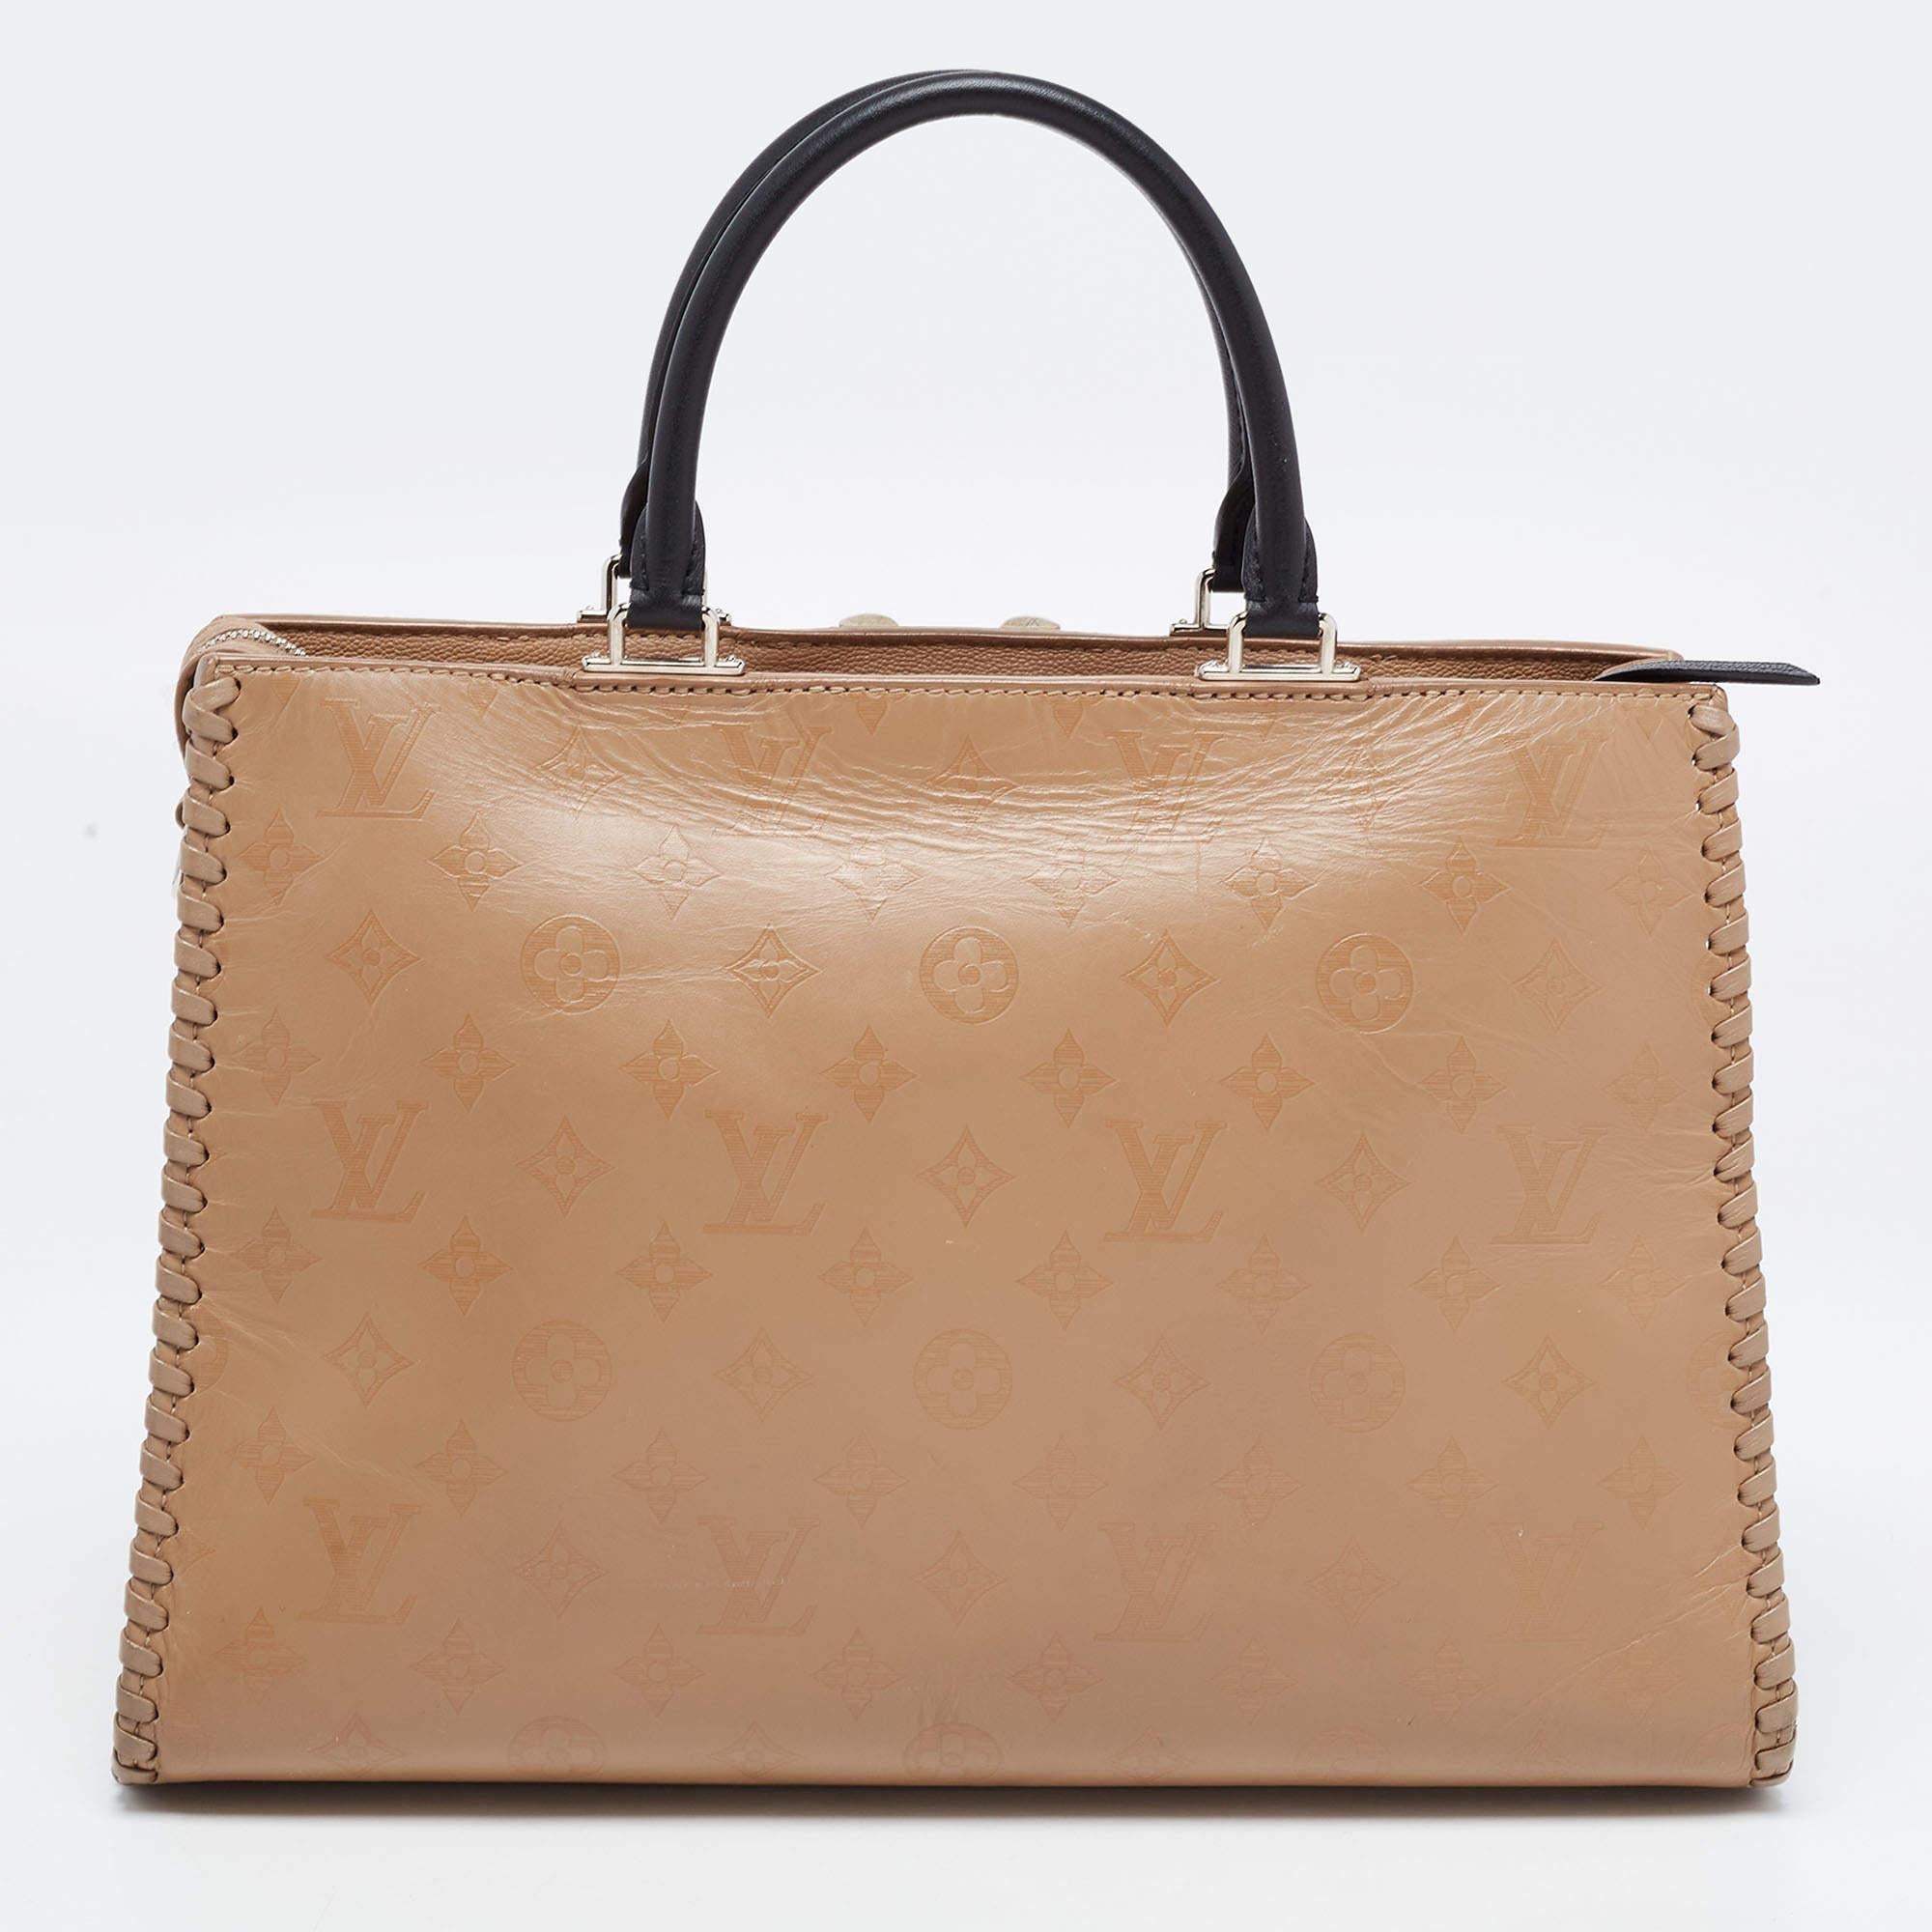 Thoughtful details, high quality, and everyday convenience mark this designer bag for women by Louis Vuitton. The bag is sewn with skill to deliver a refined look and an impeccable finish.

Includes: 2 detachable strap, Discolored Original Dustbag
